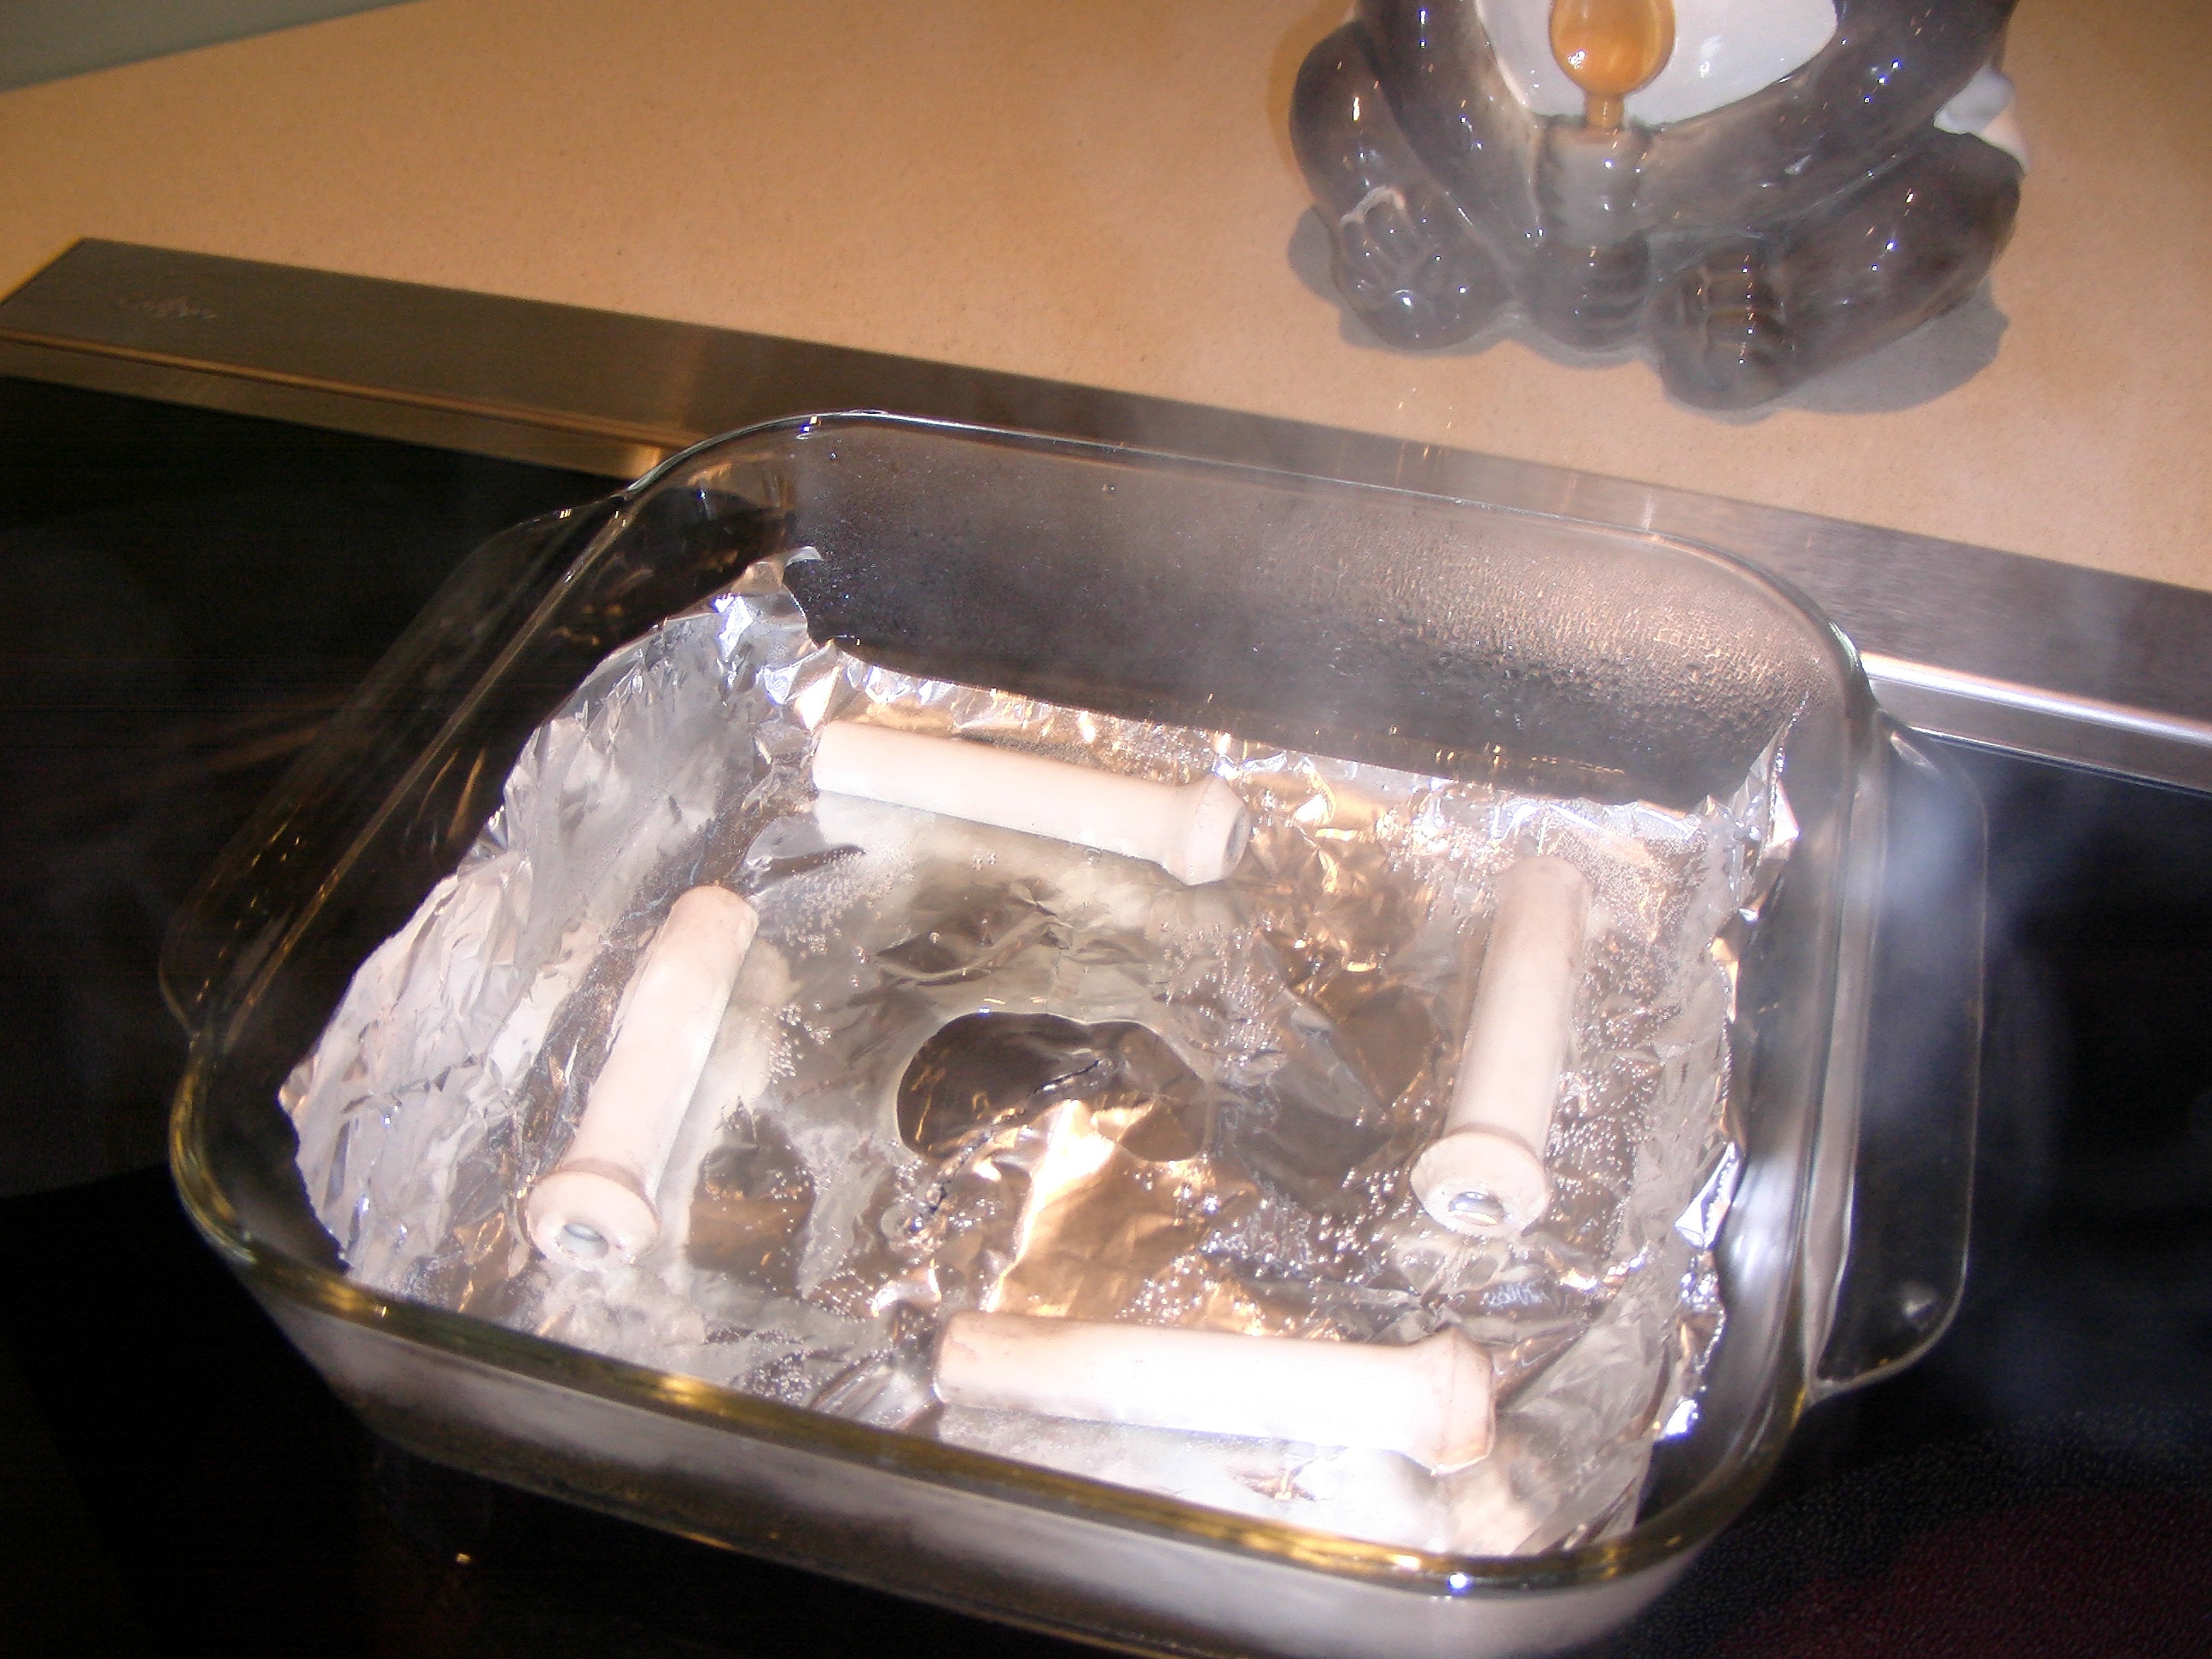 https://upload.wikimedia.org/wikipedia/commons/8/8a/Foil_on_induction_cooktop.jpg